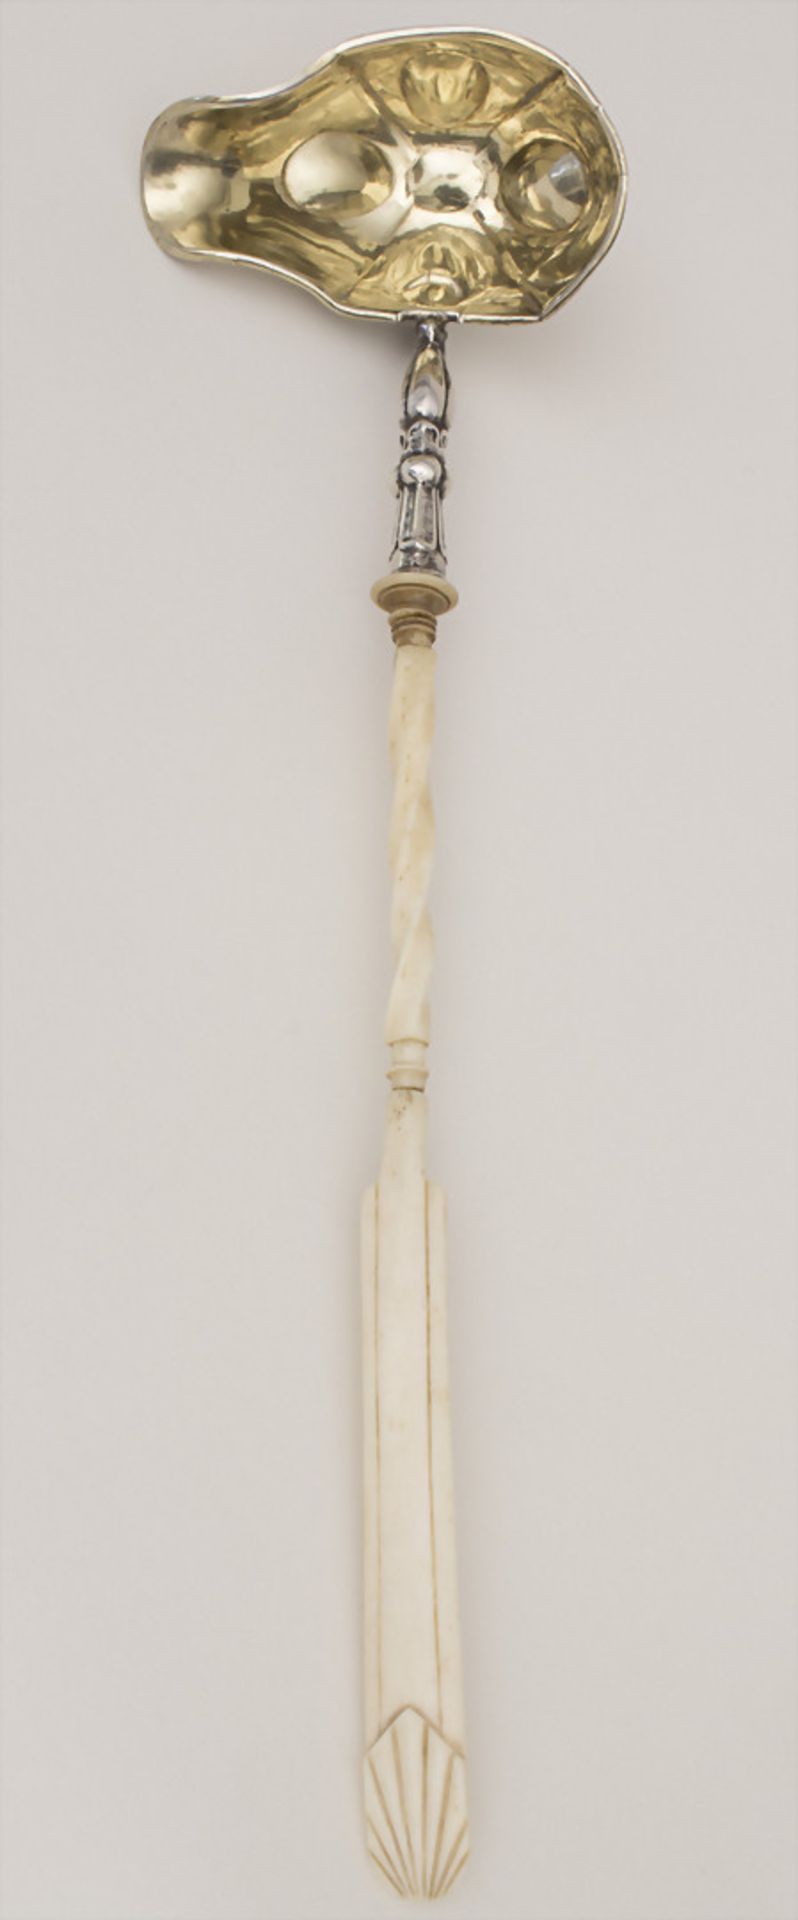 Punschkelle mit Beingriff / A silver punch ladle with bone handle, um 1800Material: Silber, Laffe